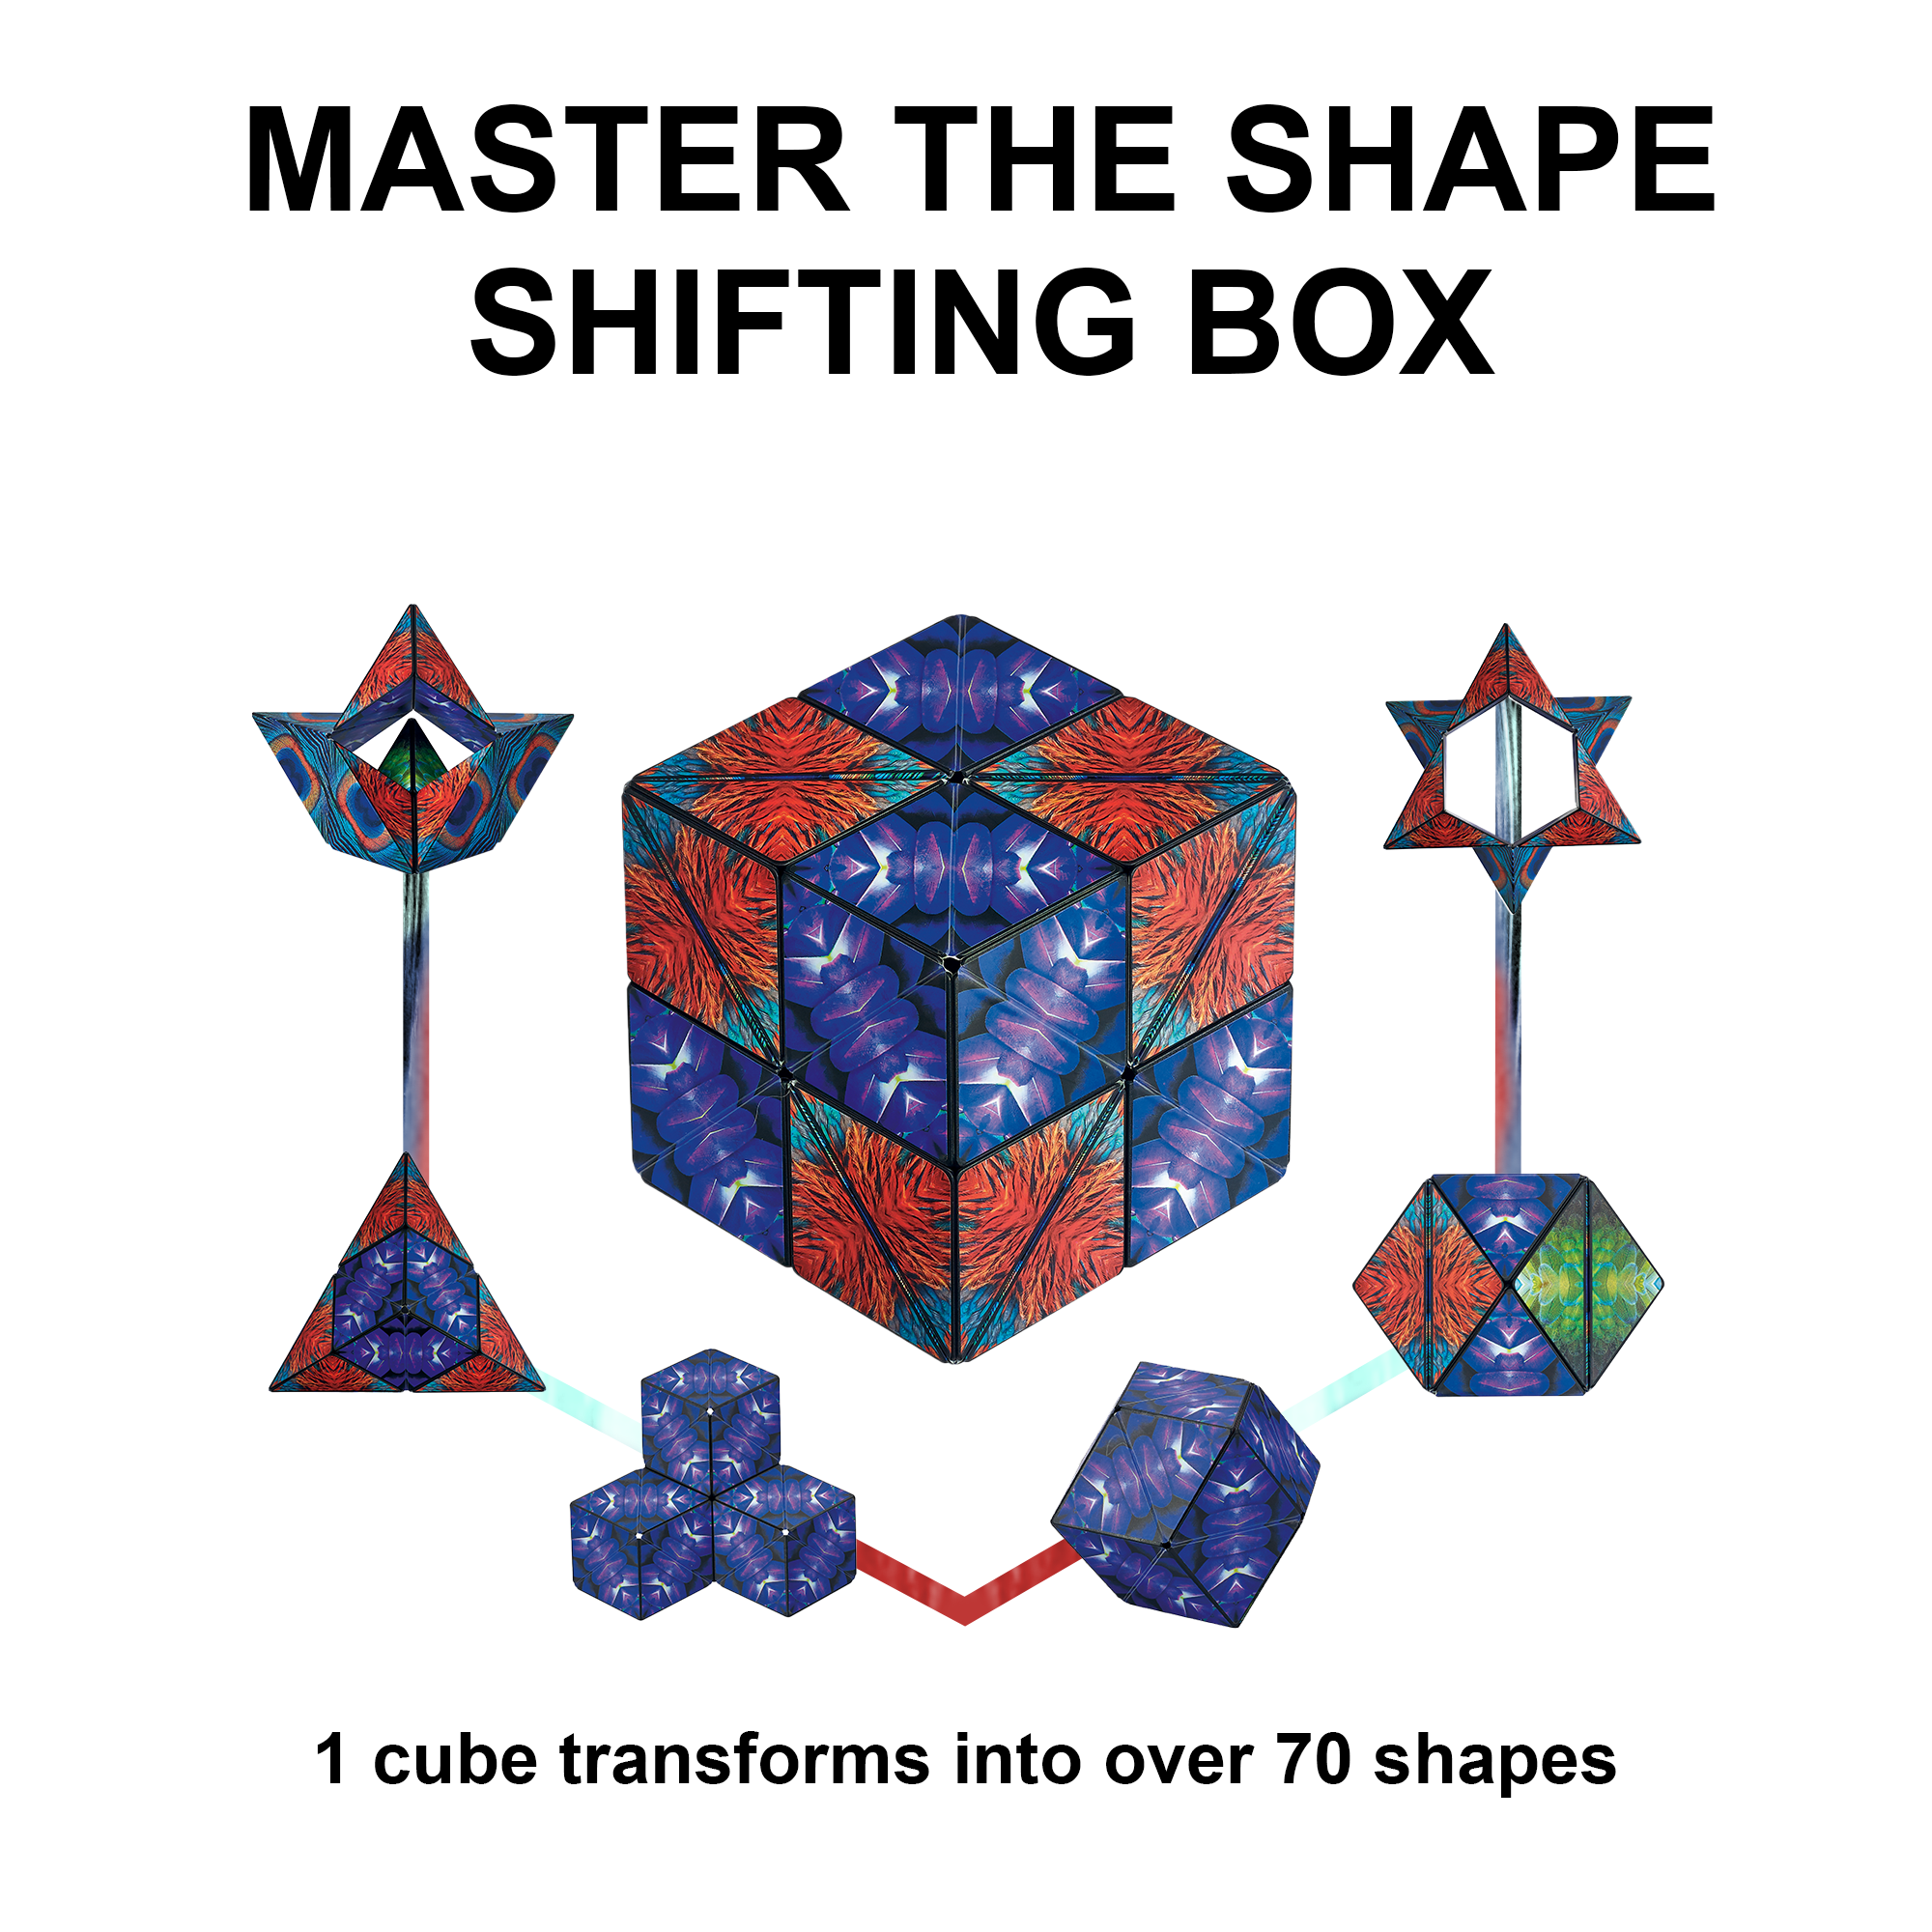 Extraordinary 3D Fidget Cube Toy Transforms Into Over 70 Shapes Award-Winning SHASHIBO Shape Shifting Box The Grateful Dead - Dancing Bears Patented Fidget Cube w/ 36 Rare Earth Magnets 